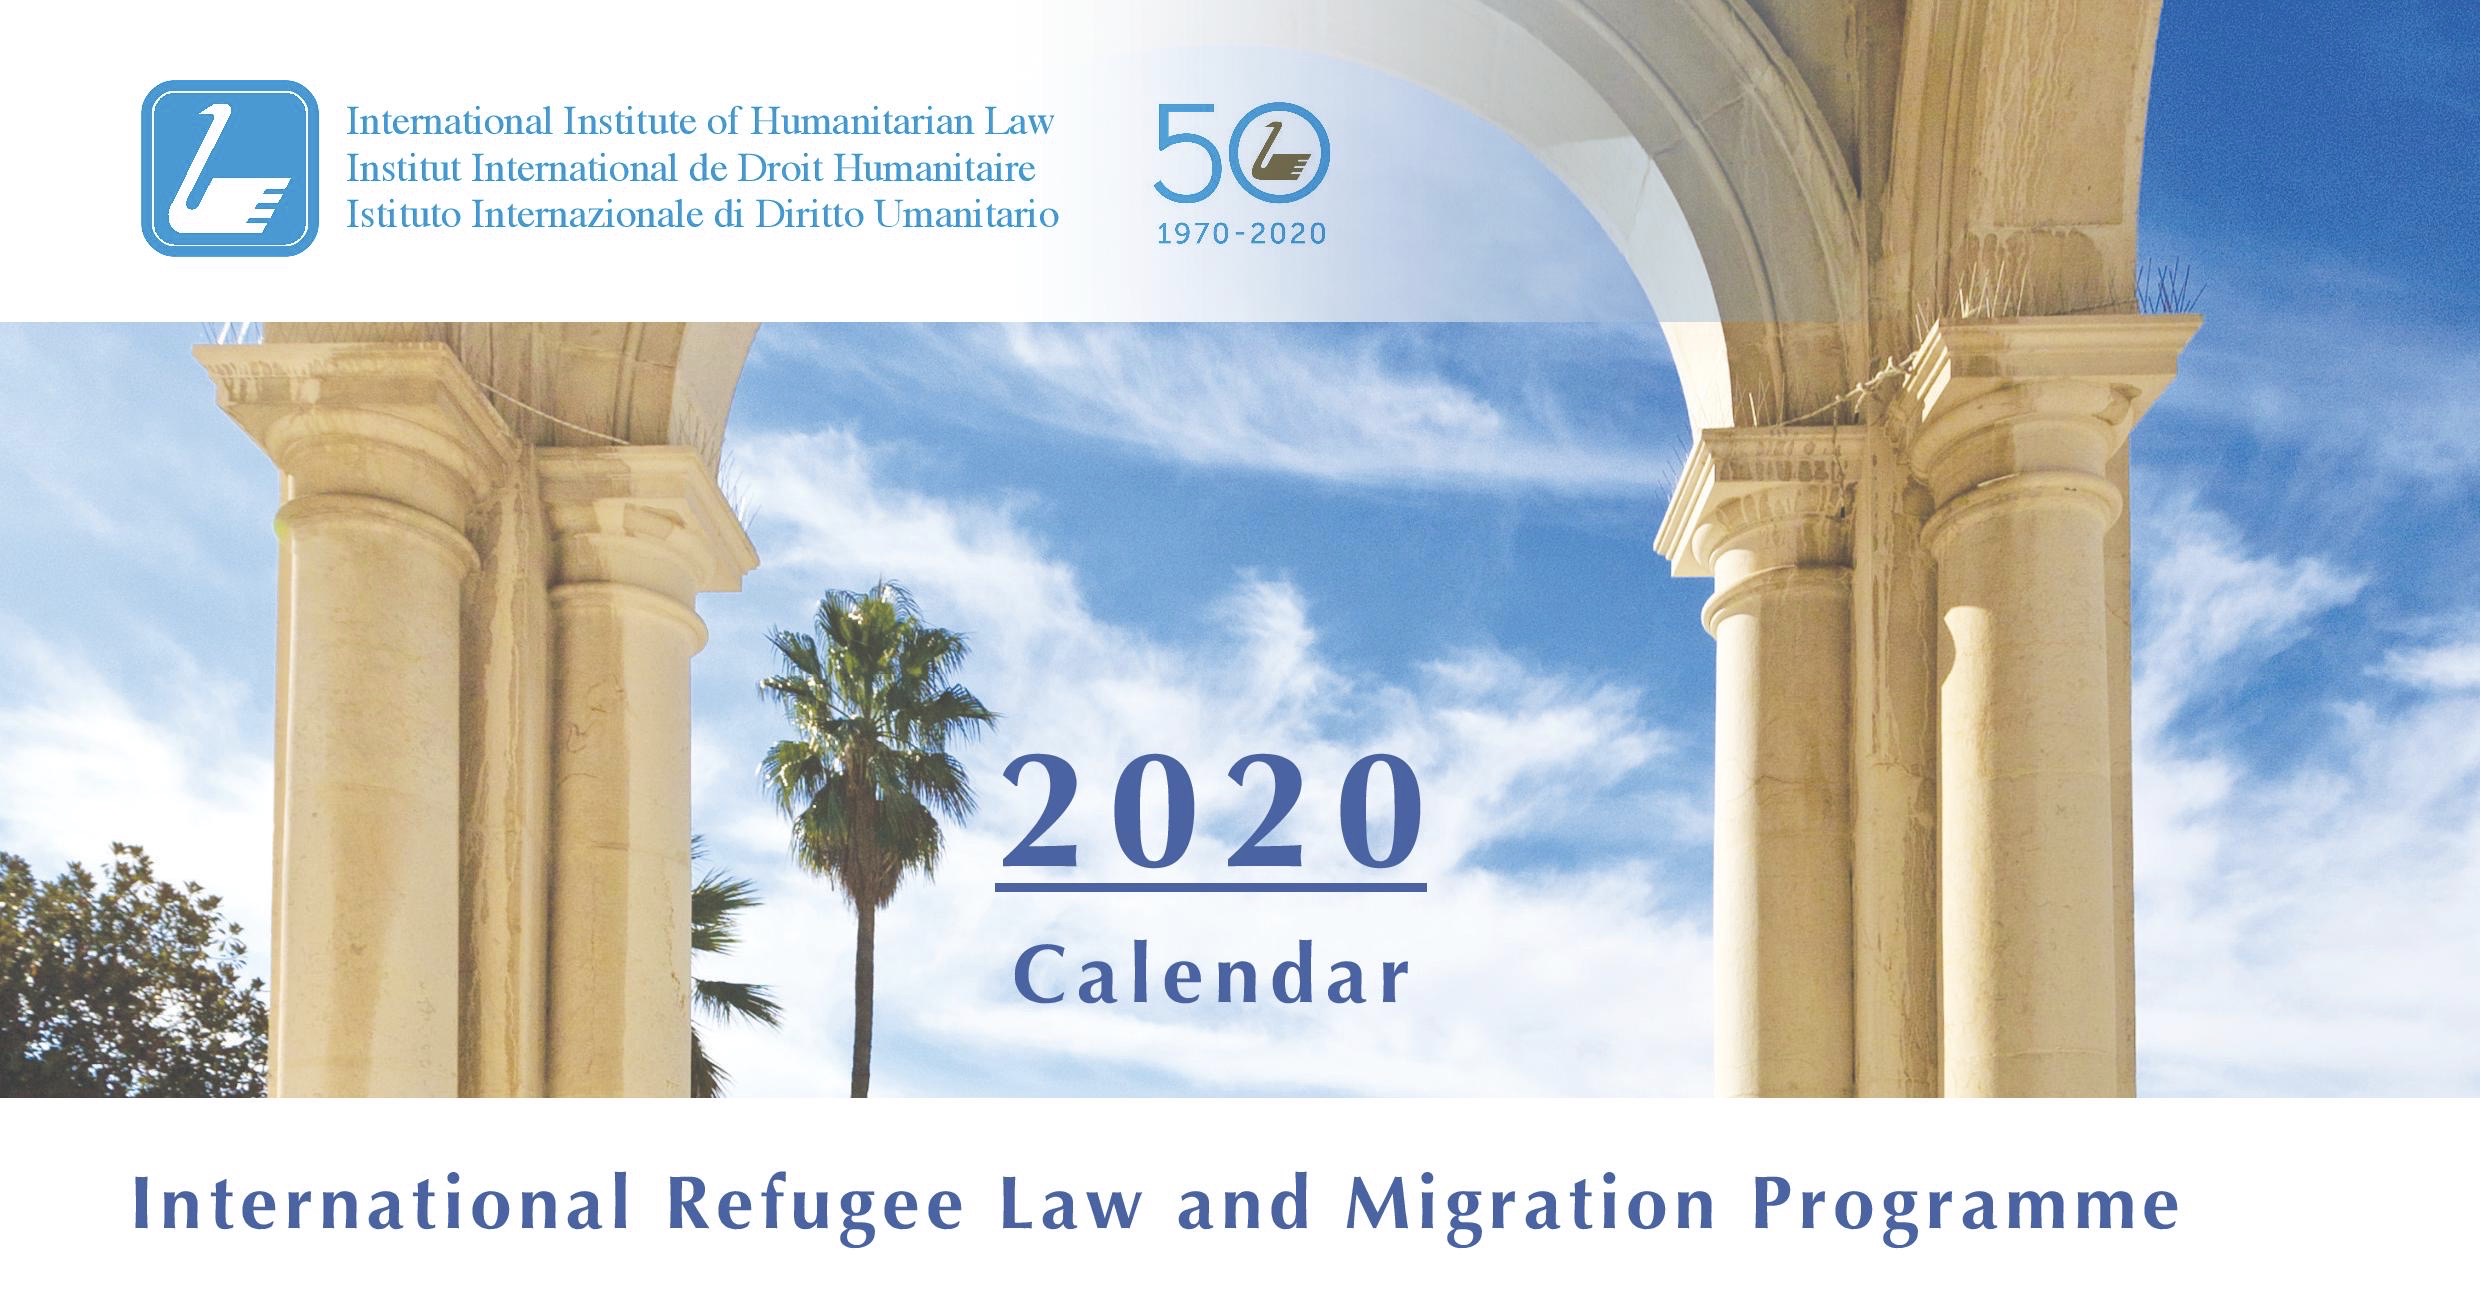 International Refugee Law and Migration Law Programme for 2020